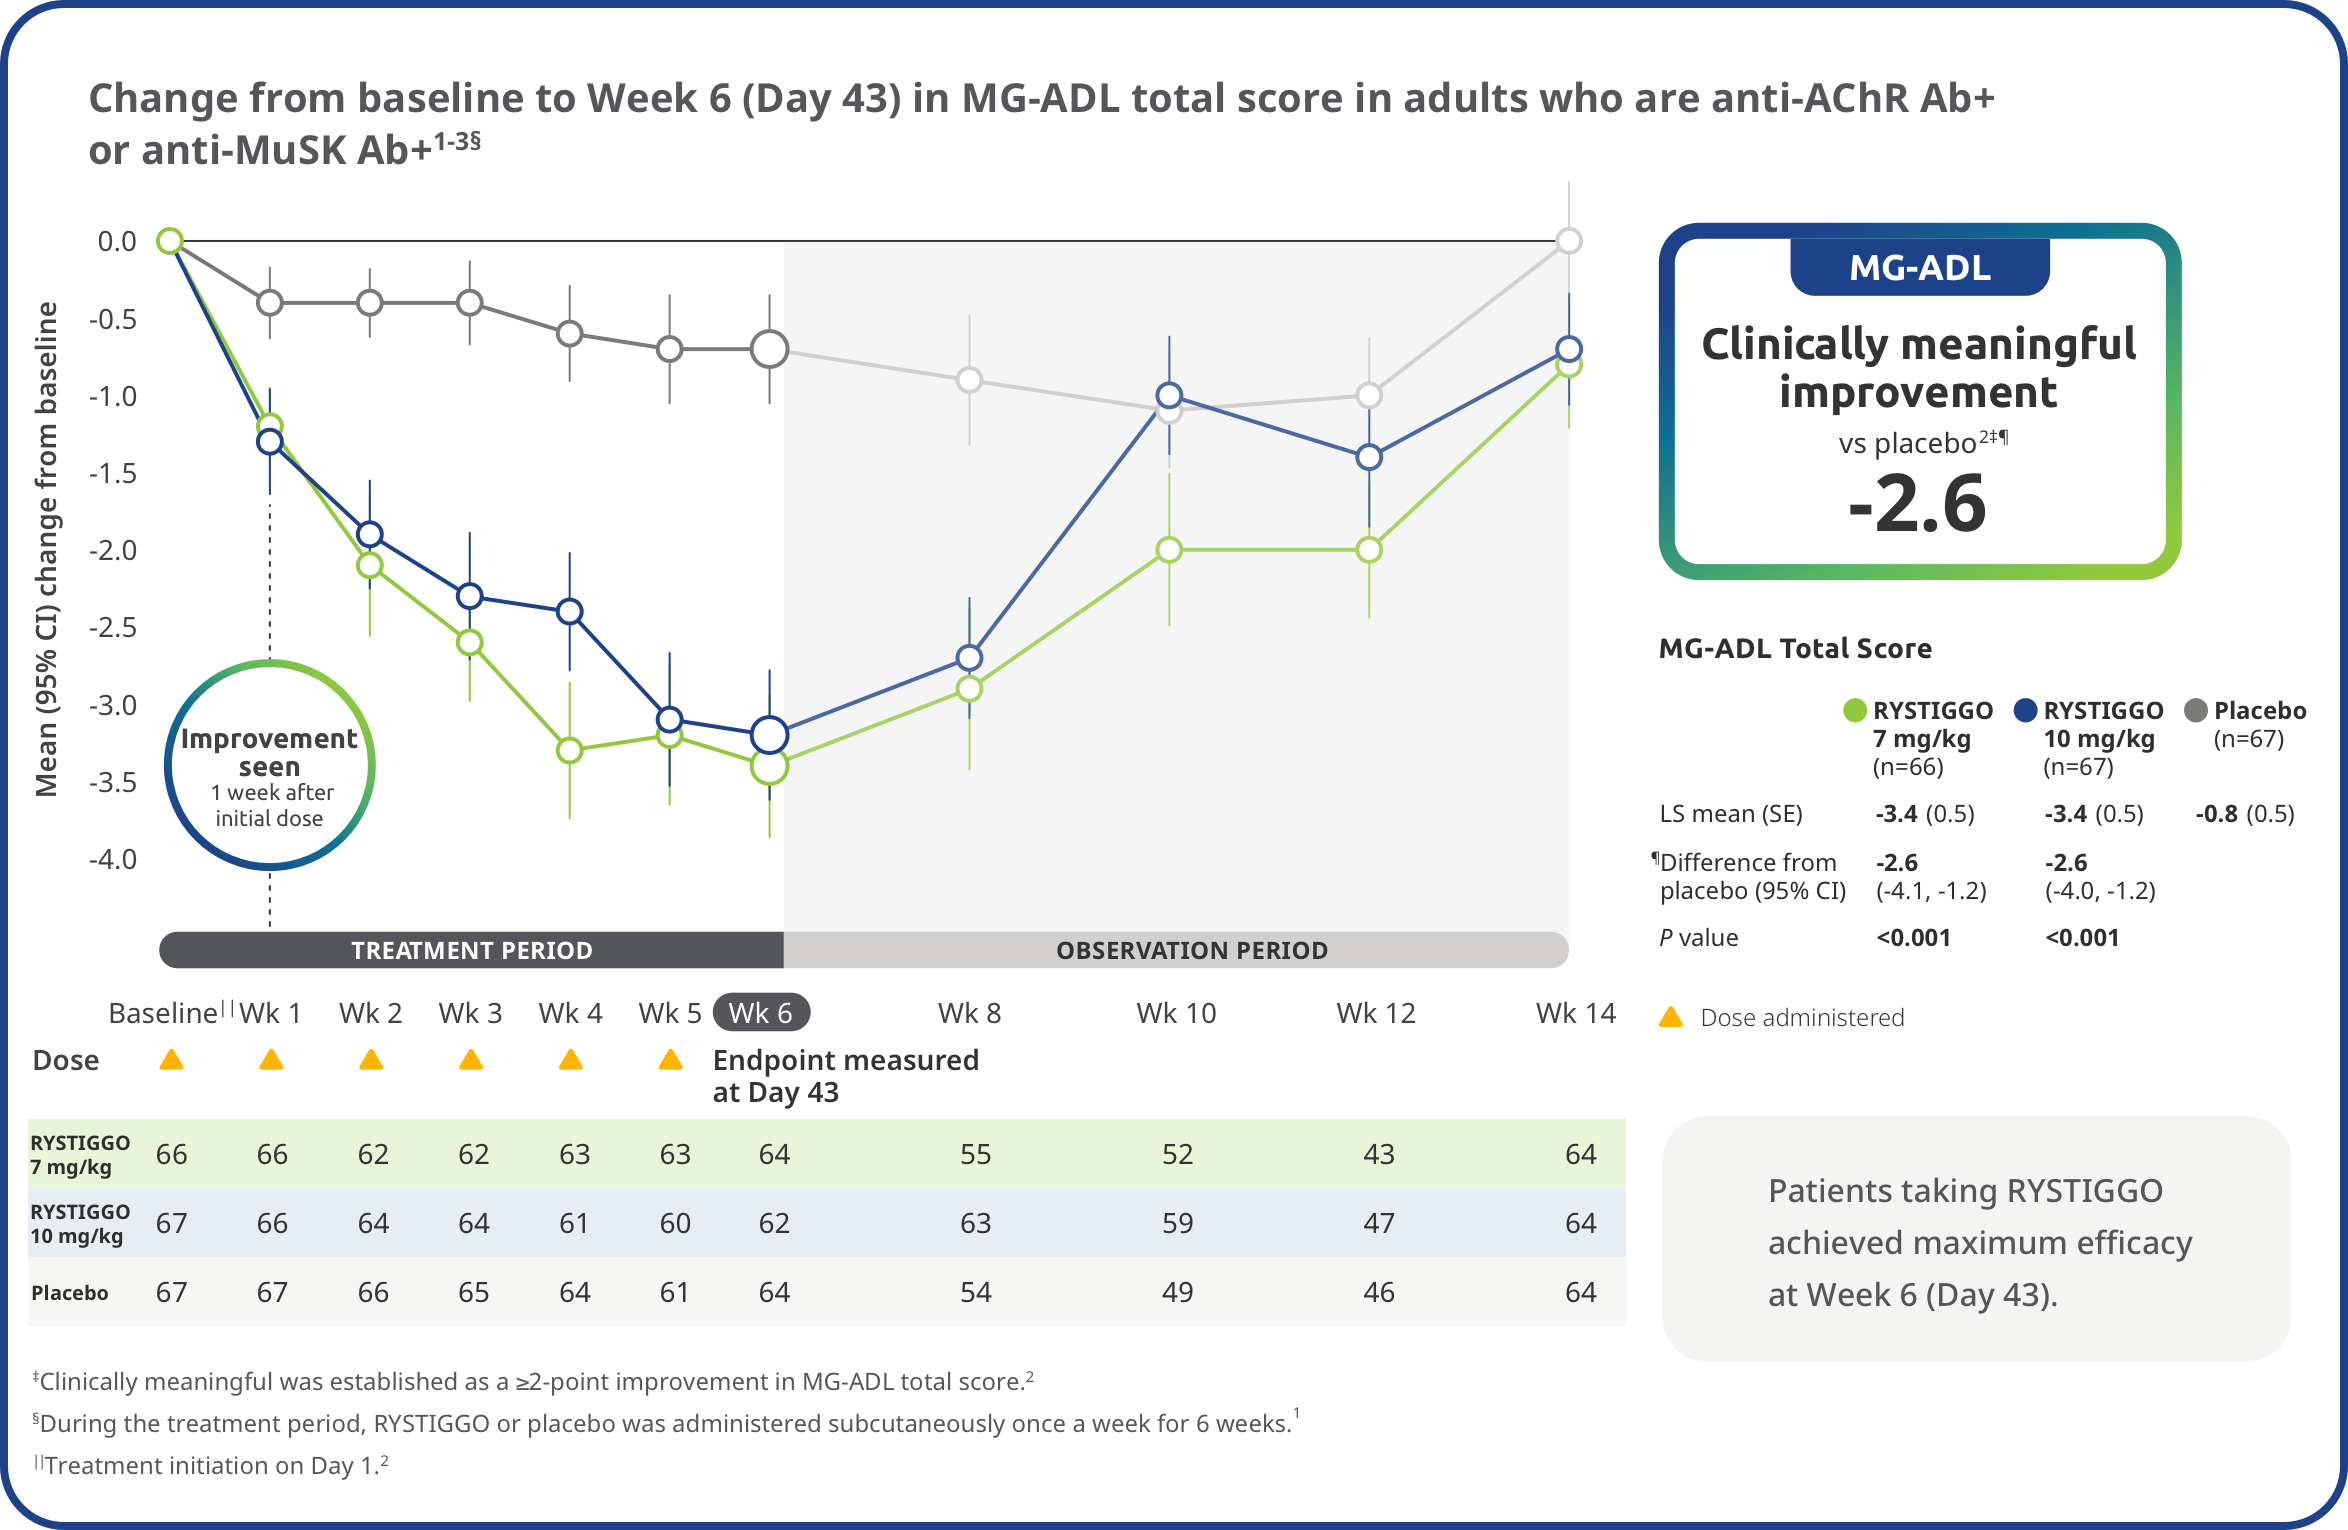 Change from baseline to Week 6 (Day 43) in MG-ADL total score in adults who are anti-AChR Ab+ or anti-MuSK Ab+.